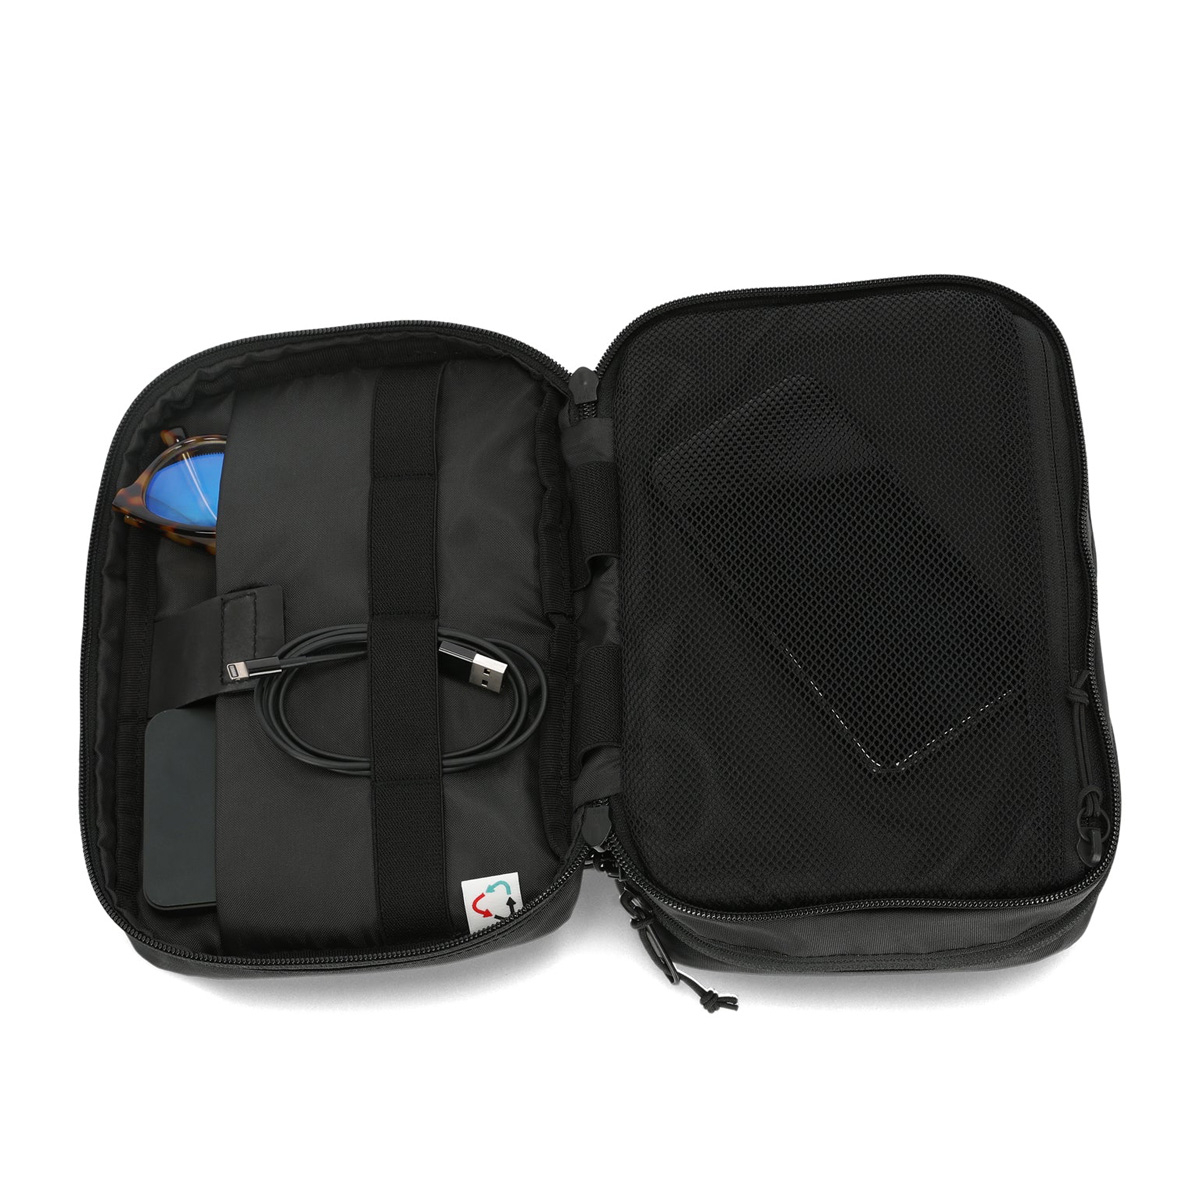 Topo Designs Tech Case Charcoal, with a internal mesh pocket and an internal padded tablet sleeve with elastic daisy chain webbing